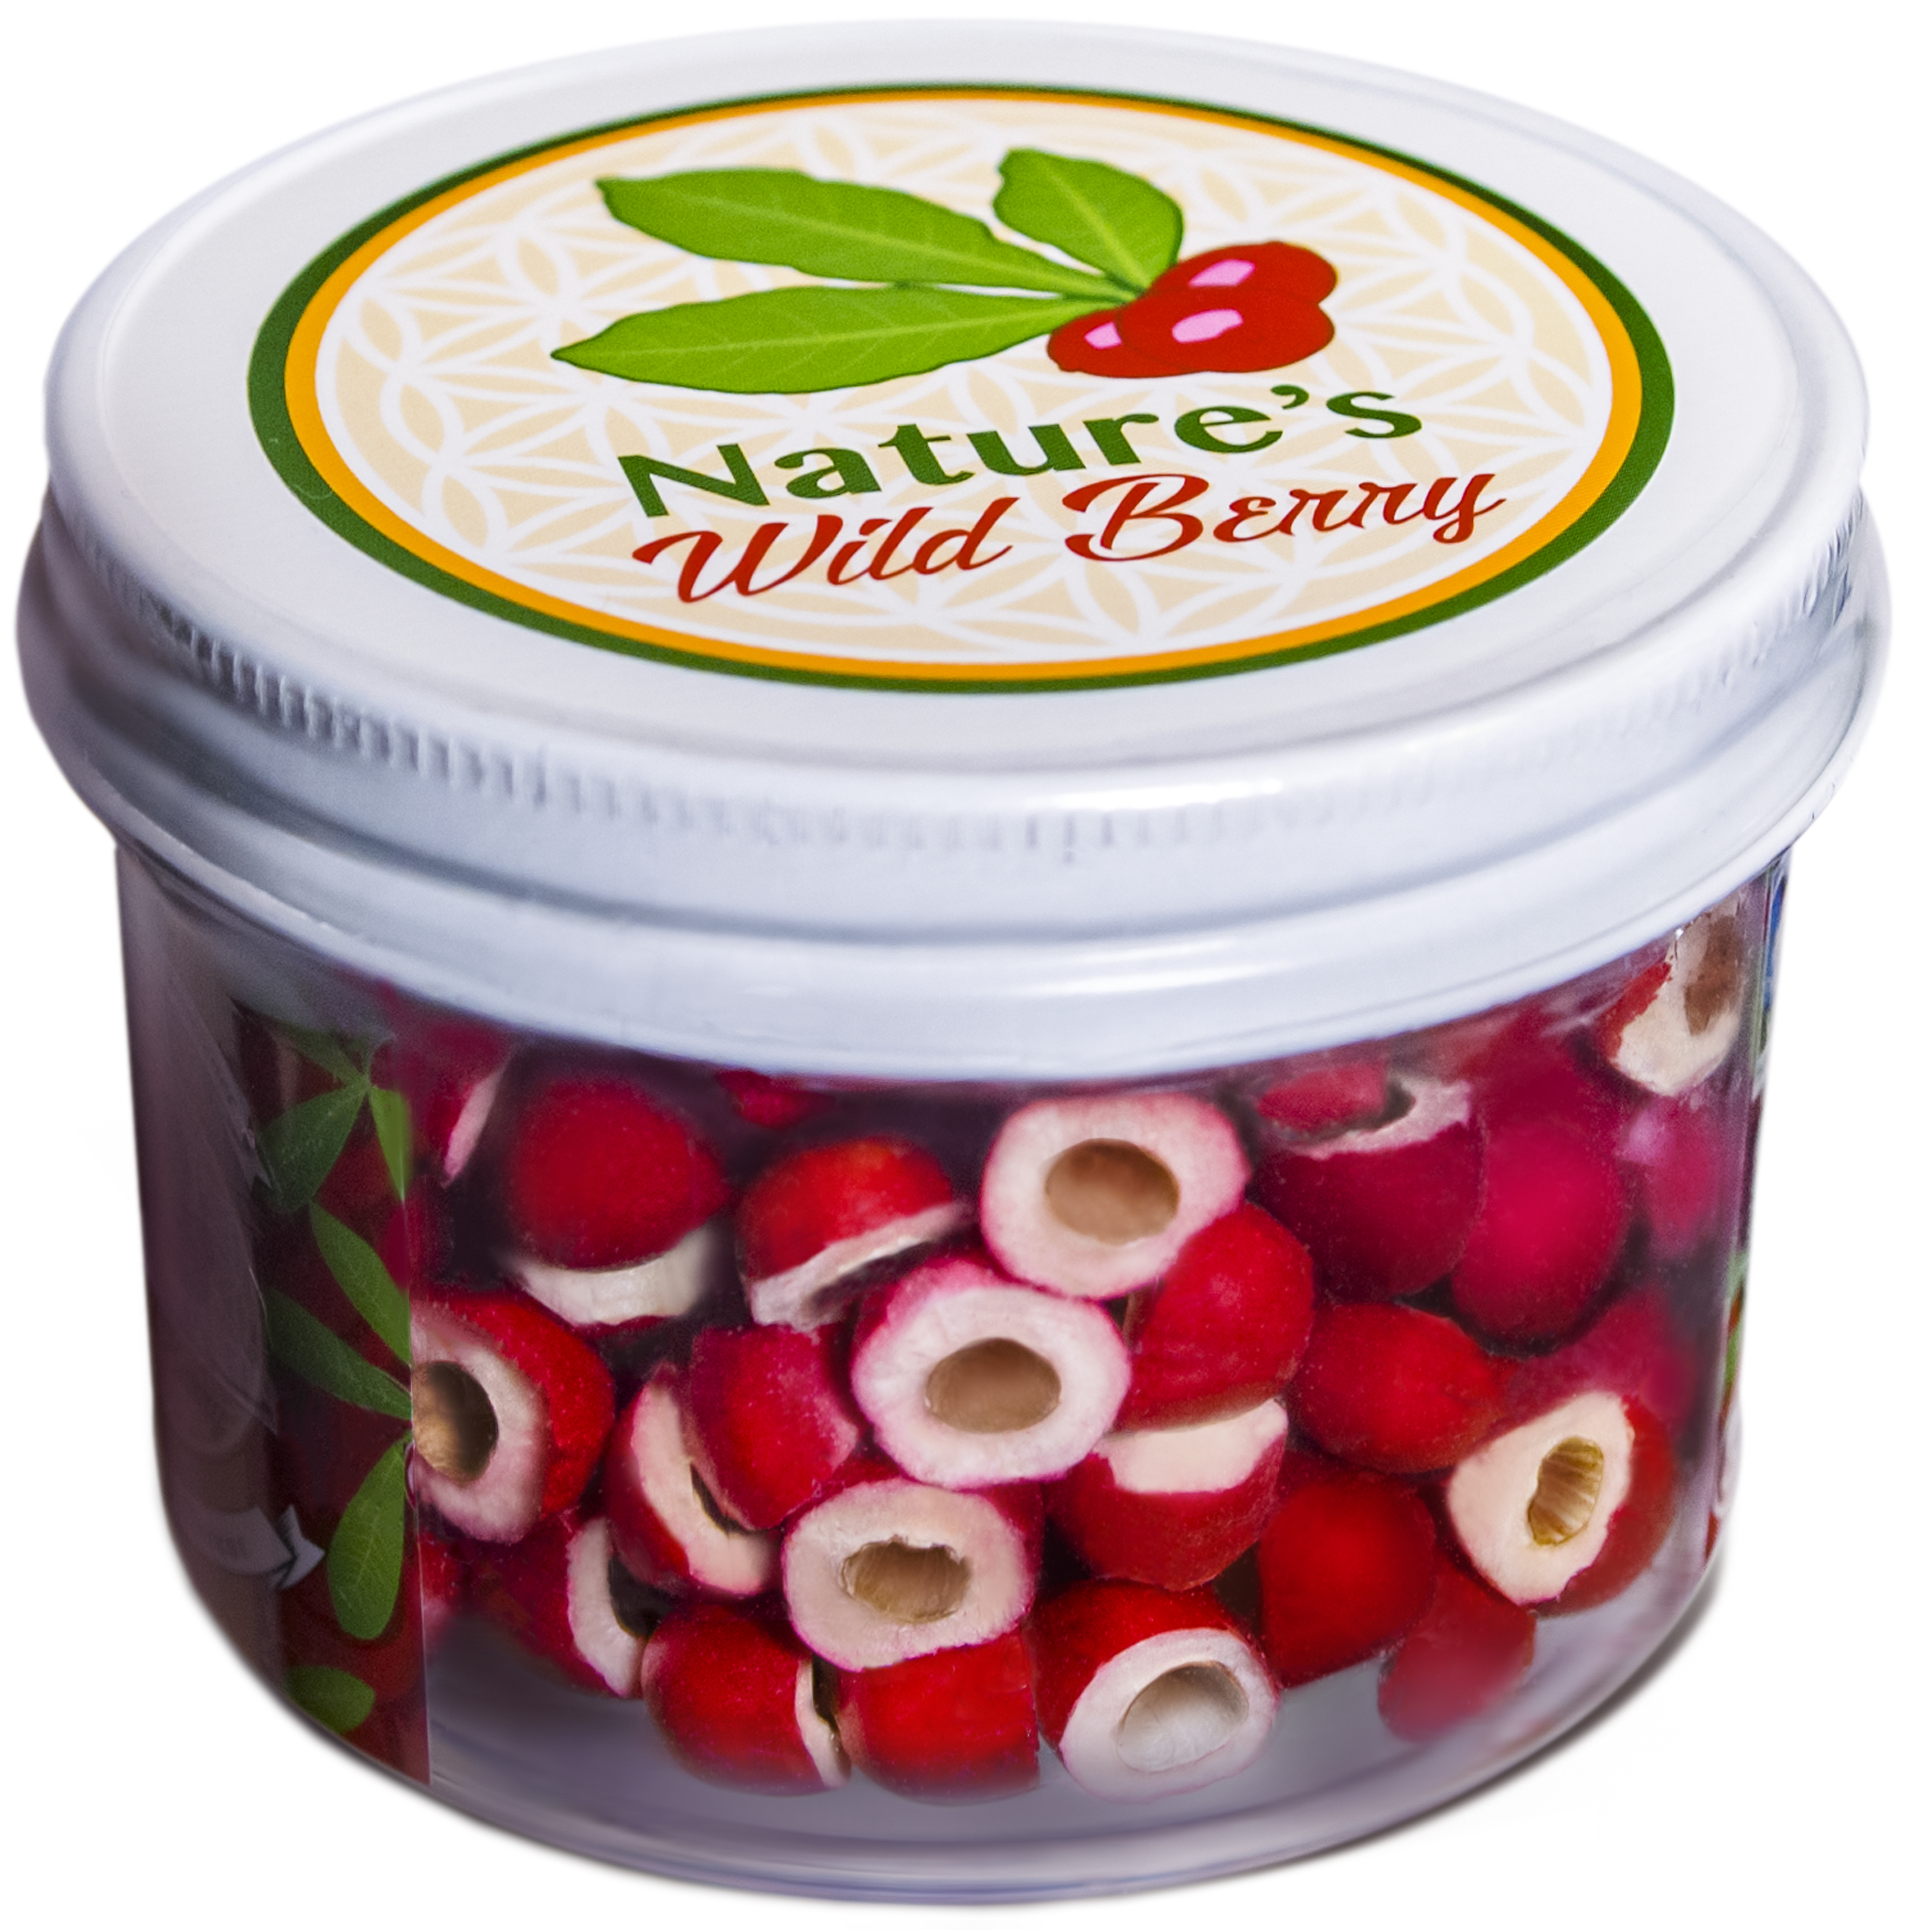 The Large Jar of Miracle Berries, 36 Grams / Approximately 280 Servings, 57 cents per serving ~ 15-20 mins